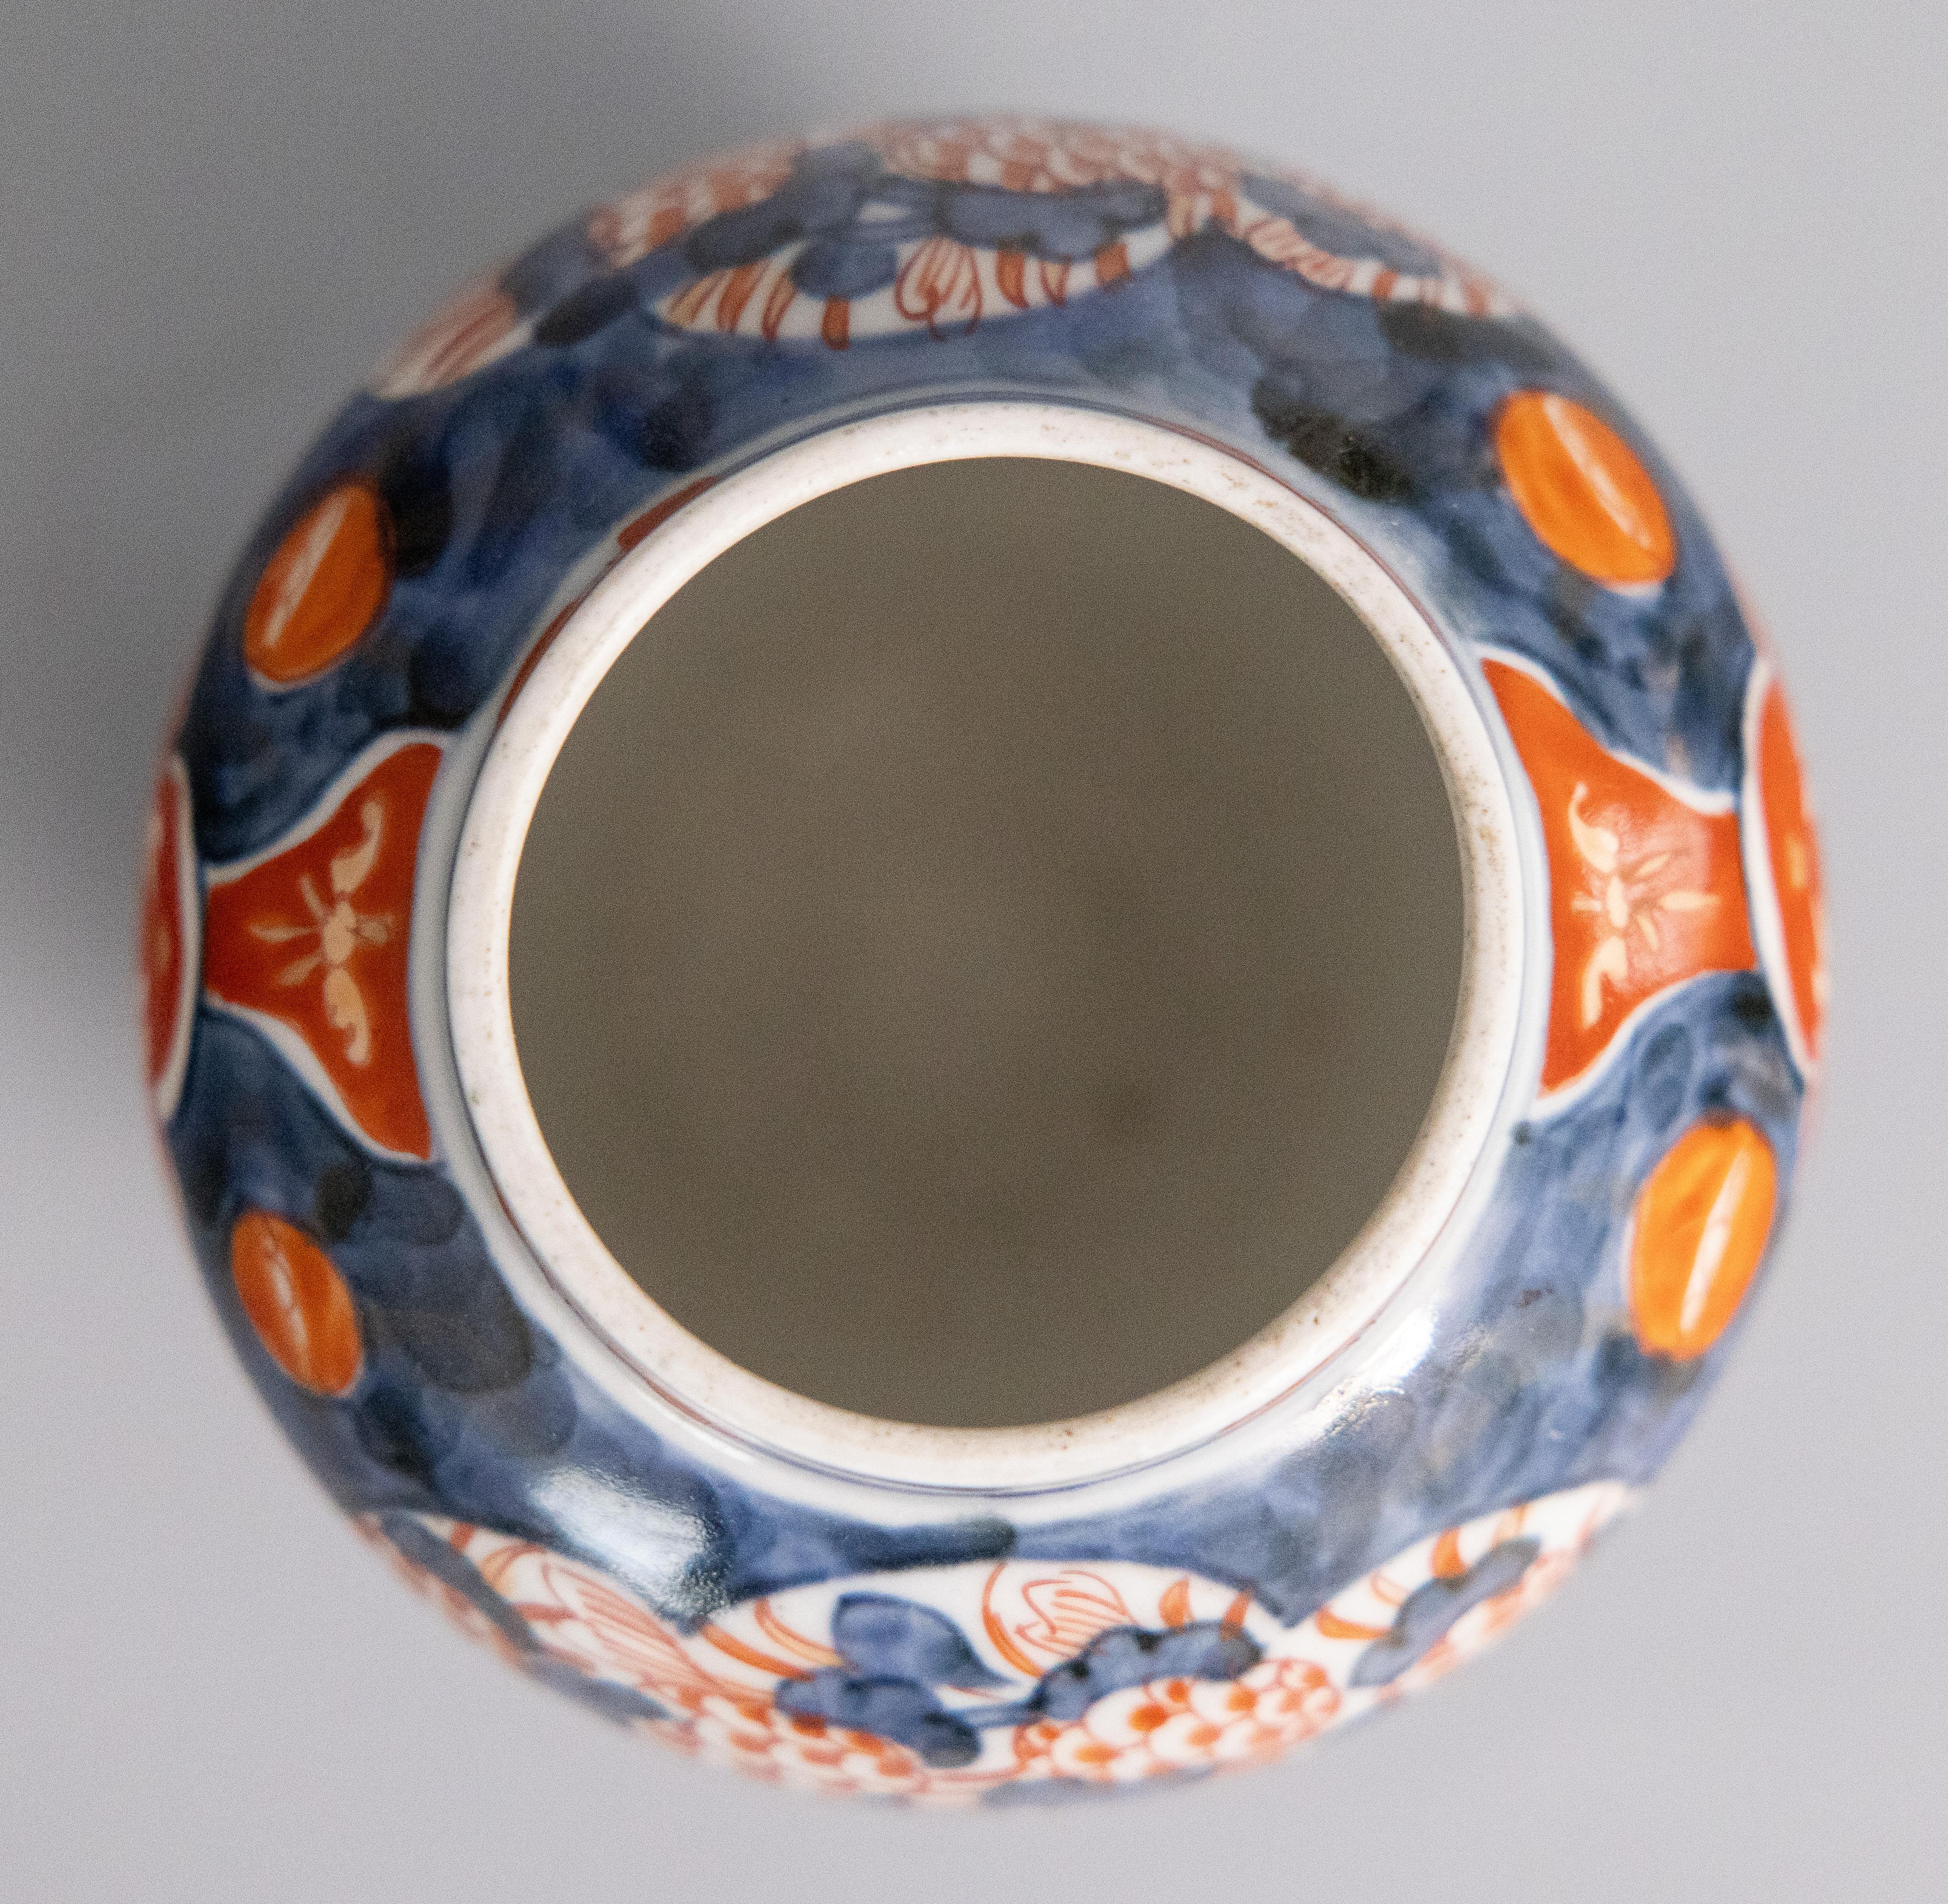 Antique 19th Century Japanese Imari Porcelain Vase/Brush Pot In Good Condition For Sale In Pearland, TX